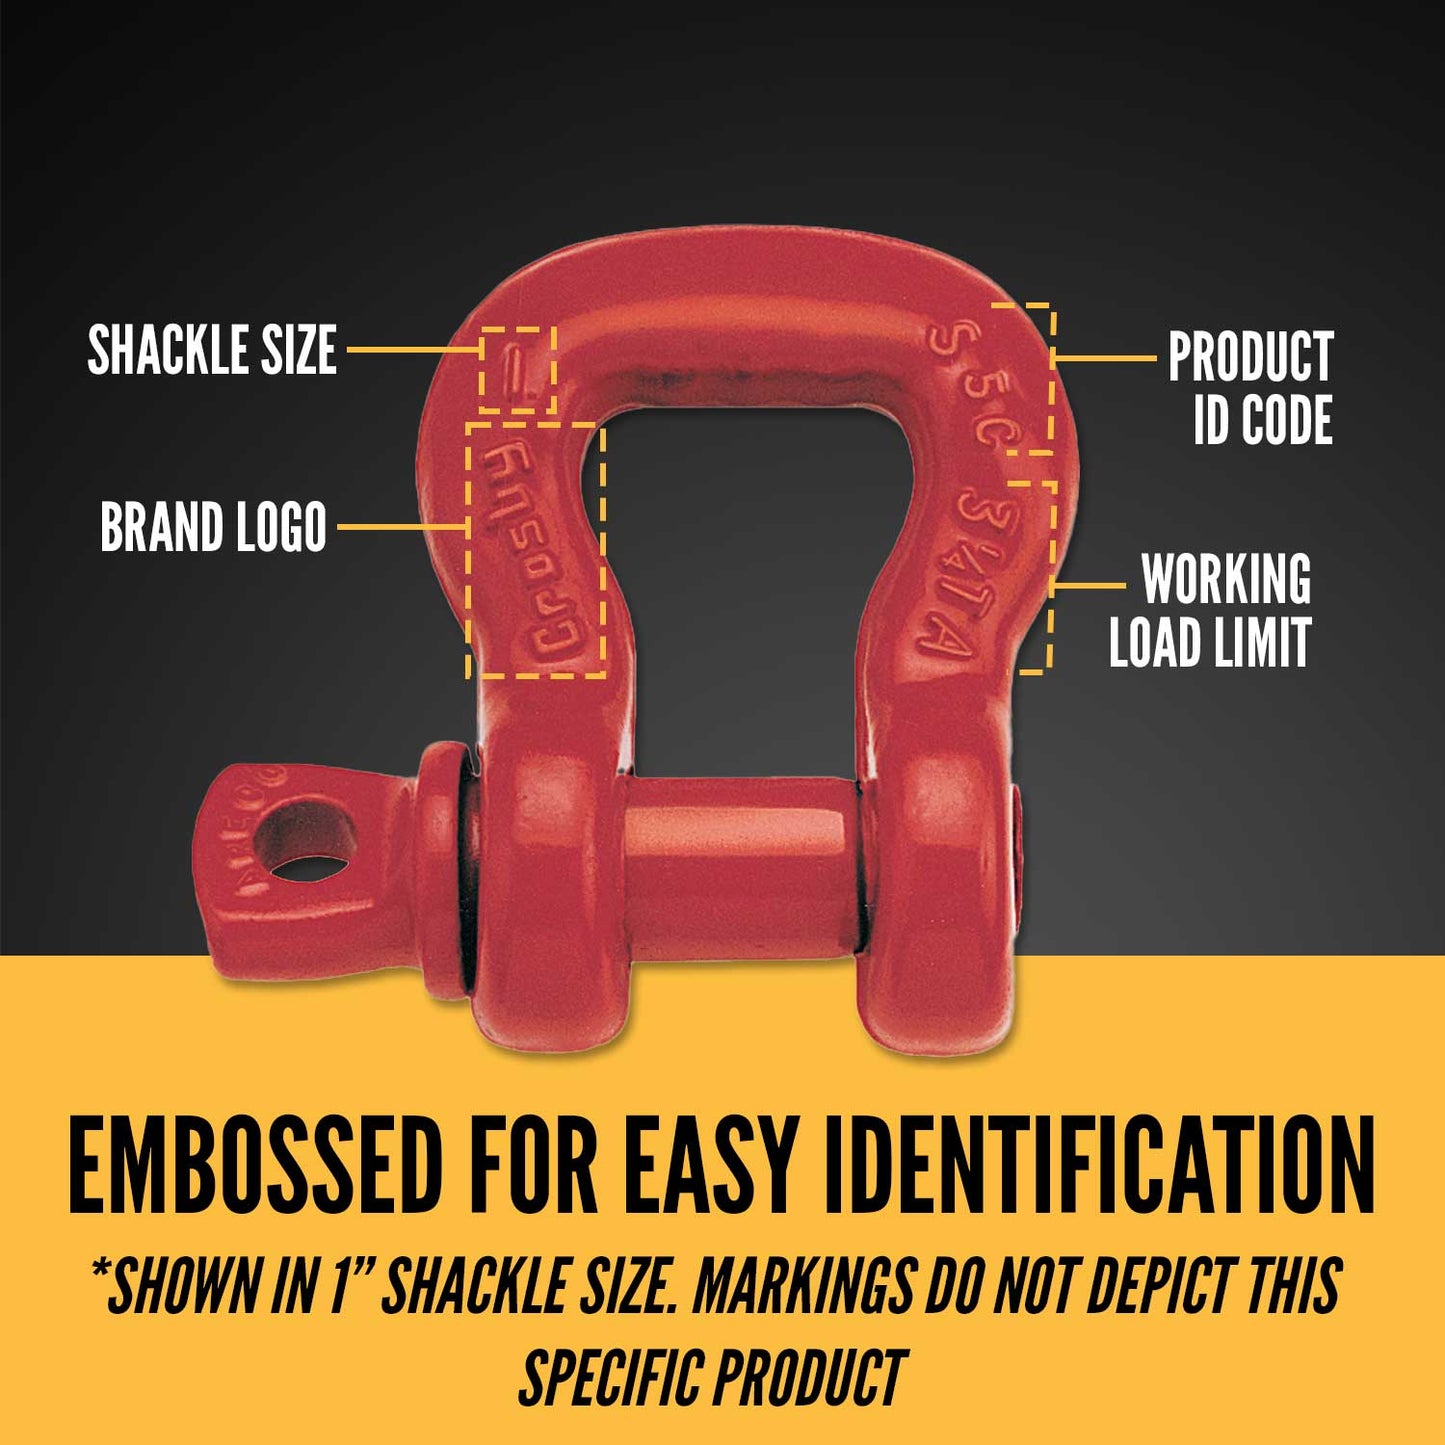 Crosby® Screw Pin Sling Saver Shackle | S-253 - 3"- 12.5 Ton embossed for easy identification